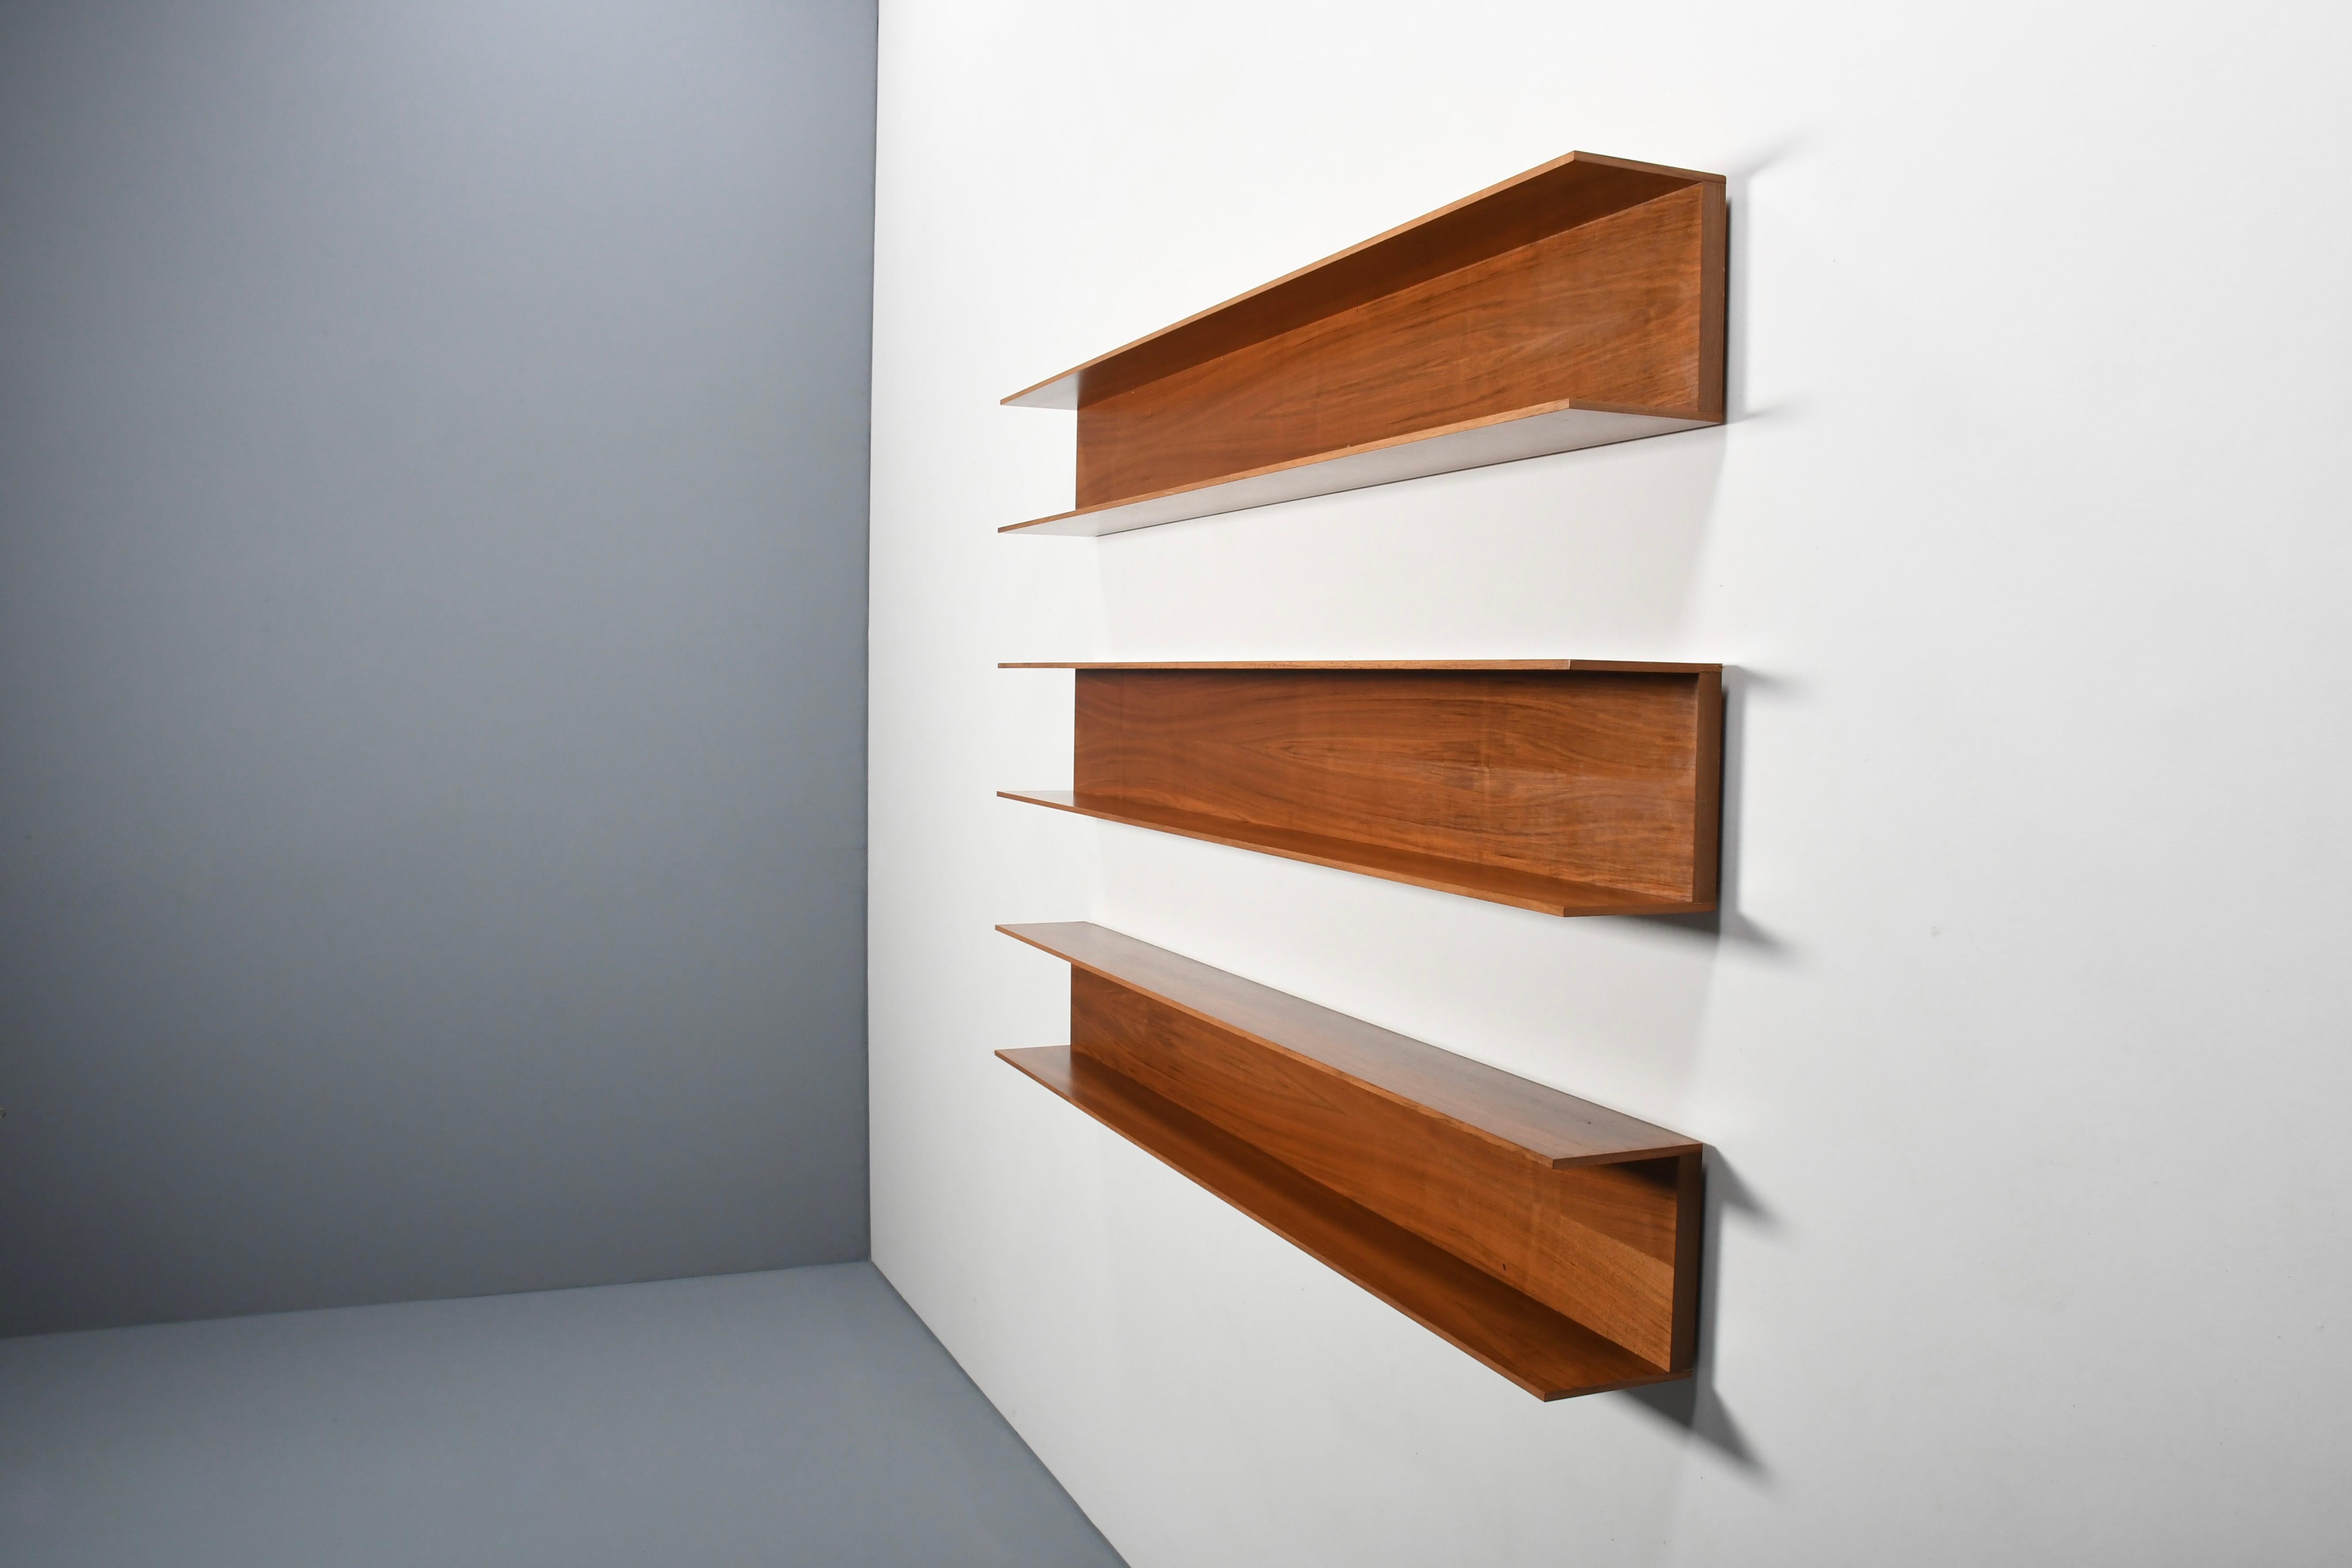 Wall shelves designed by Walter Wirz in very good condition.

Manufactured by Wilhelm Renz in the 1960s.

The shelves are made of a beautiful teak wood and have a gorgeous wood grain and color. 

The shelves can be combined in many different ways,